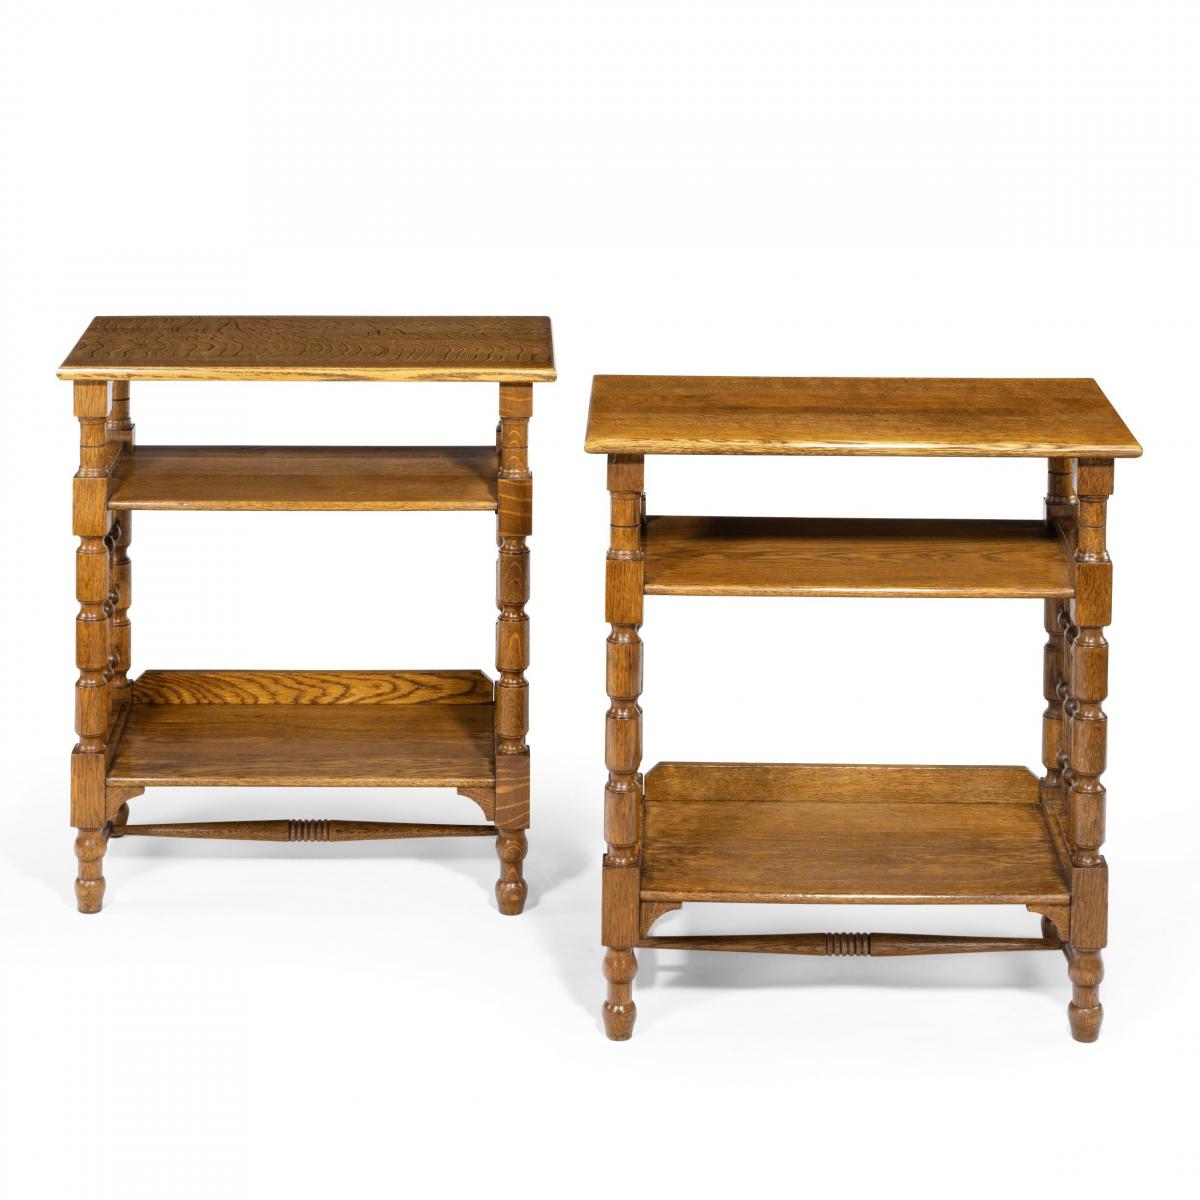 A Matched Pair of Oak Side Tables Attributed to Liberty’s